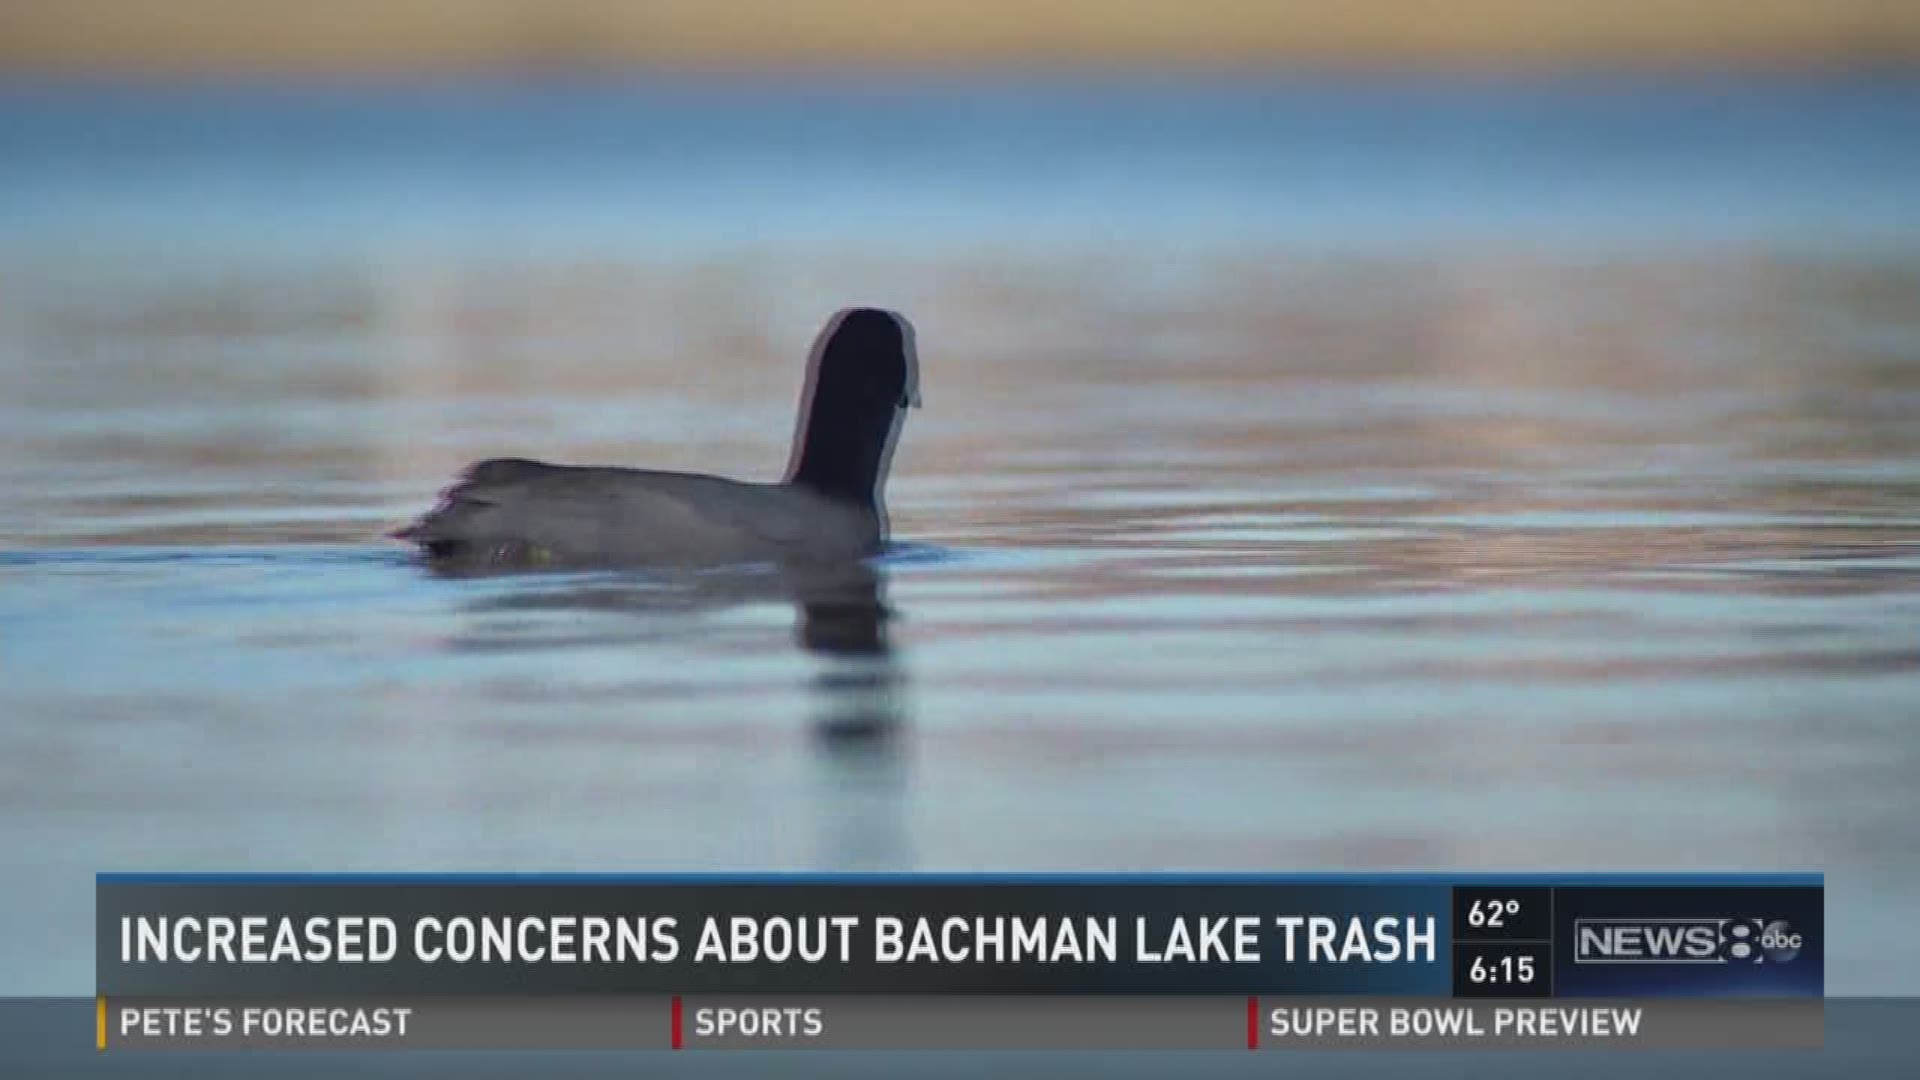 Increased concerns about Bachman Lake trash